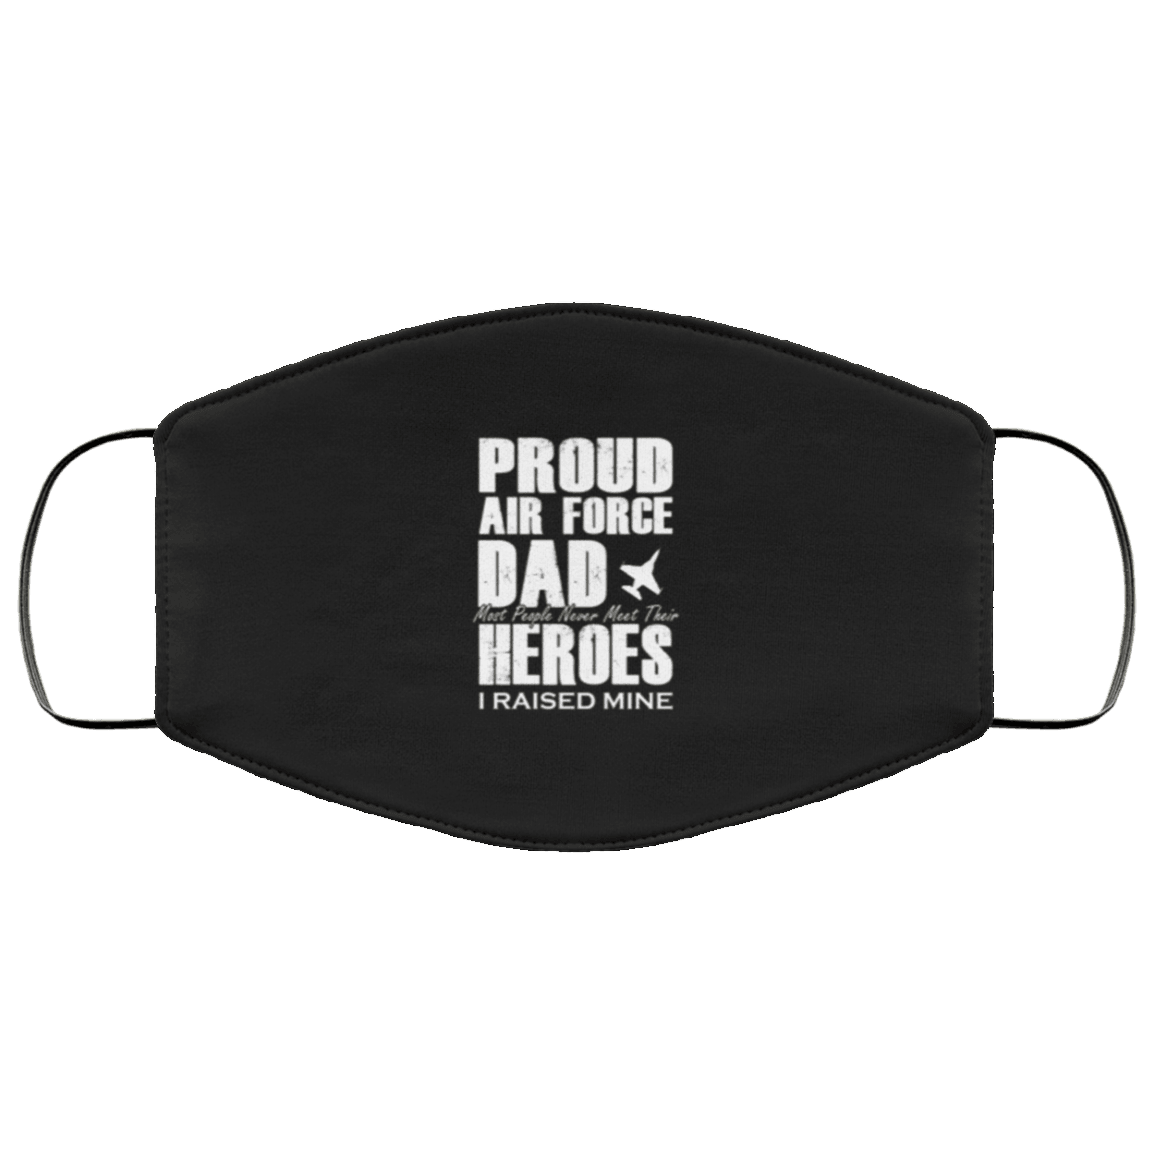 Designs by MyUtopia Shout Out:Proud Air Force Dad Adult Fabric Face Mask with Elastic Ear Loops,3 Layer Fabric Face Mask / Black / Adult,Fabric Face Mask